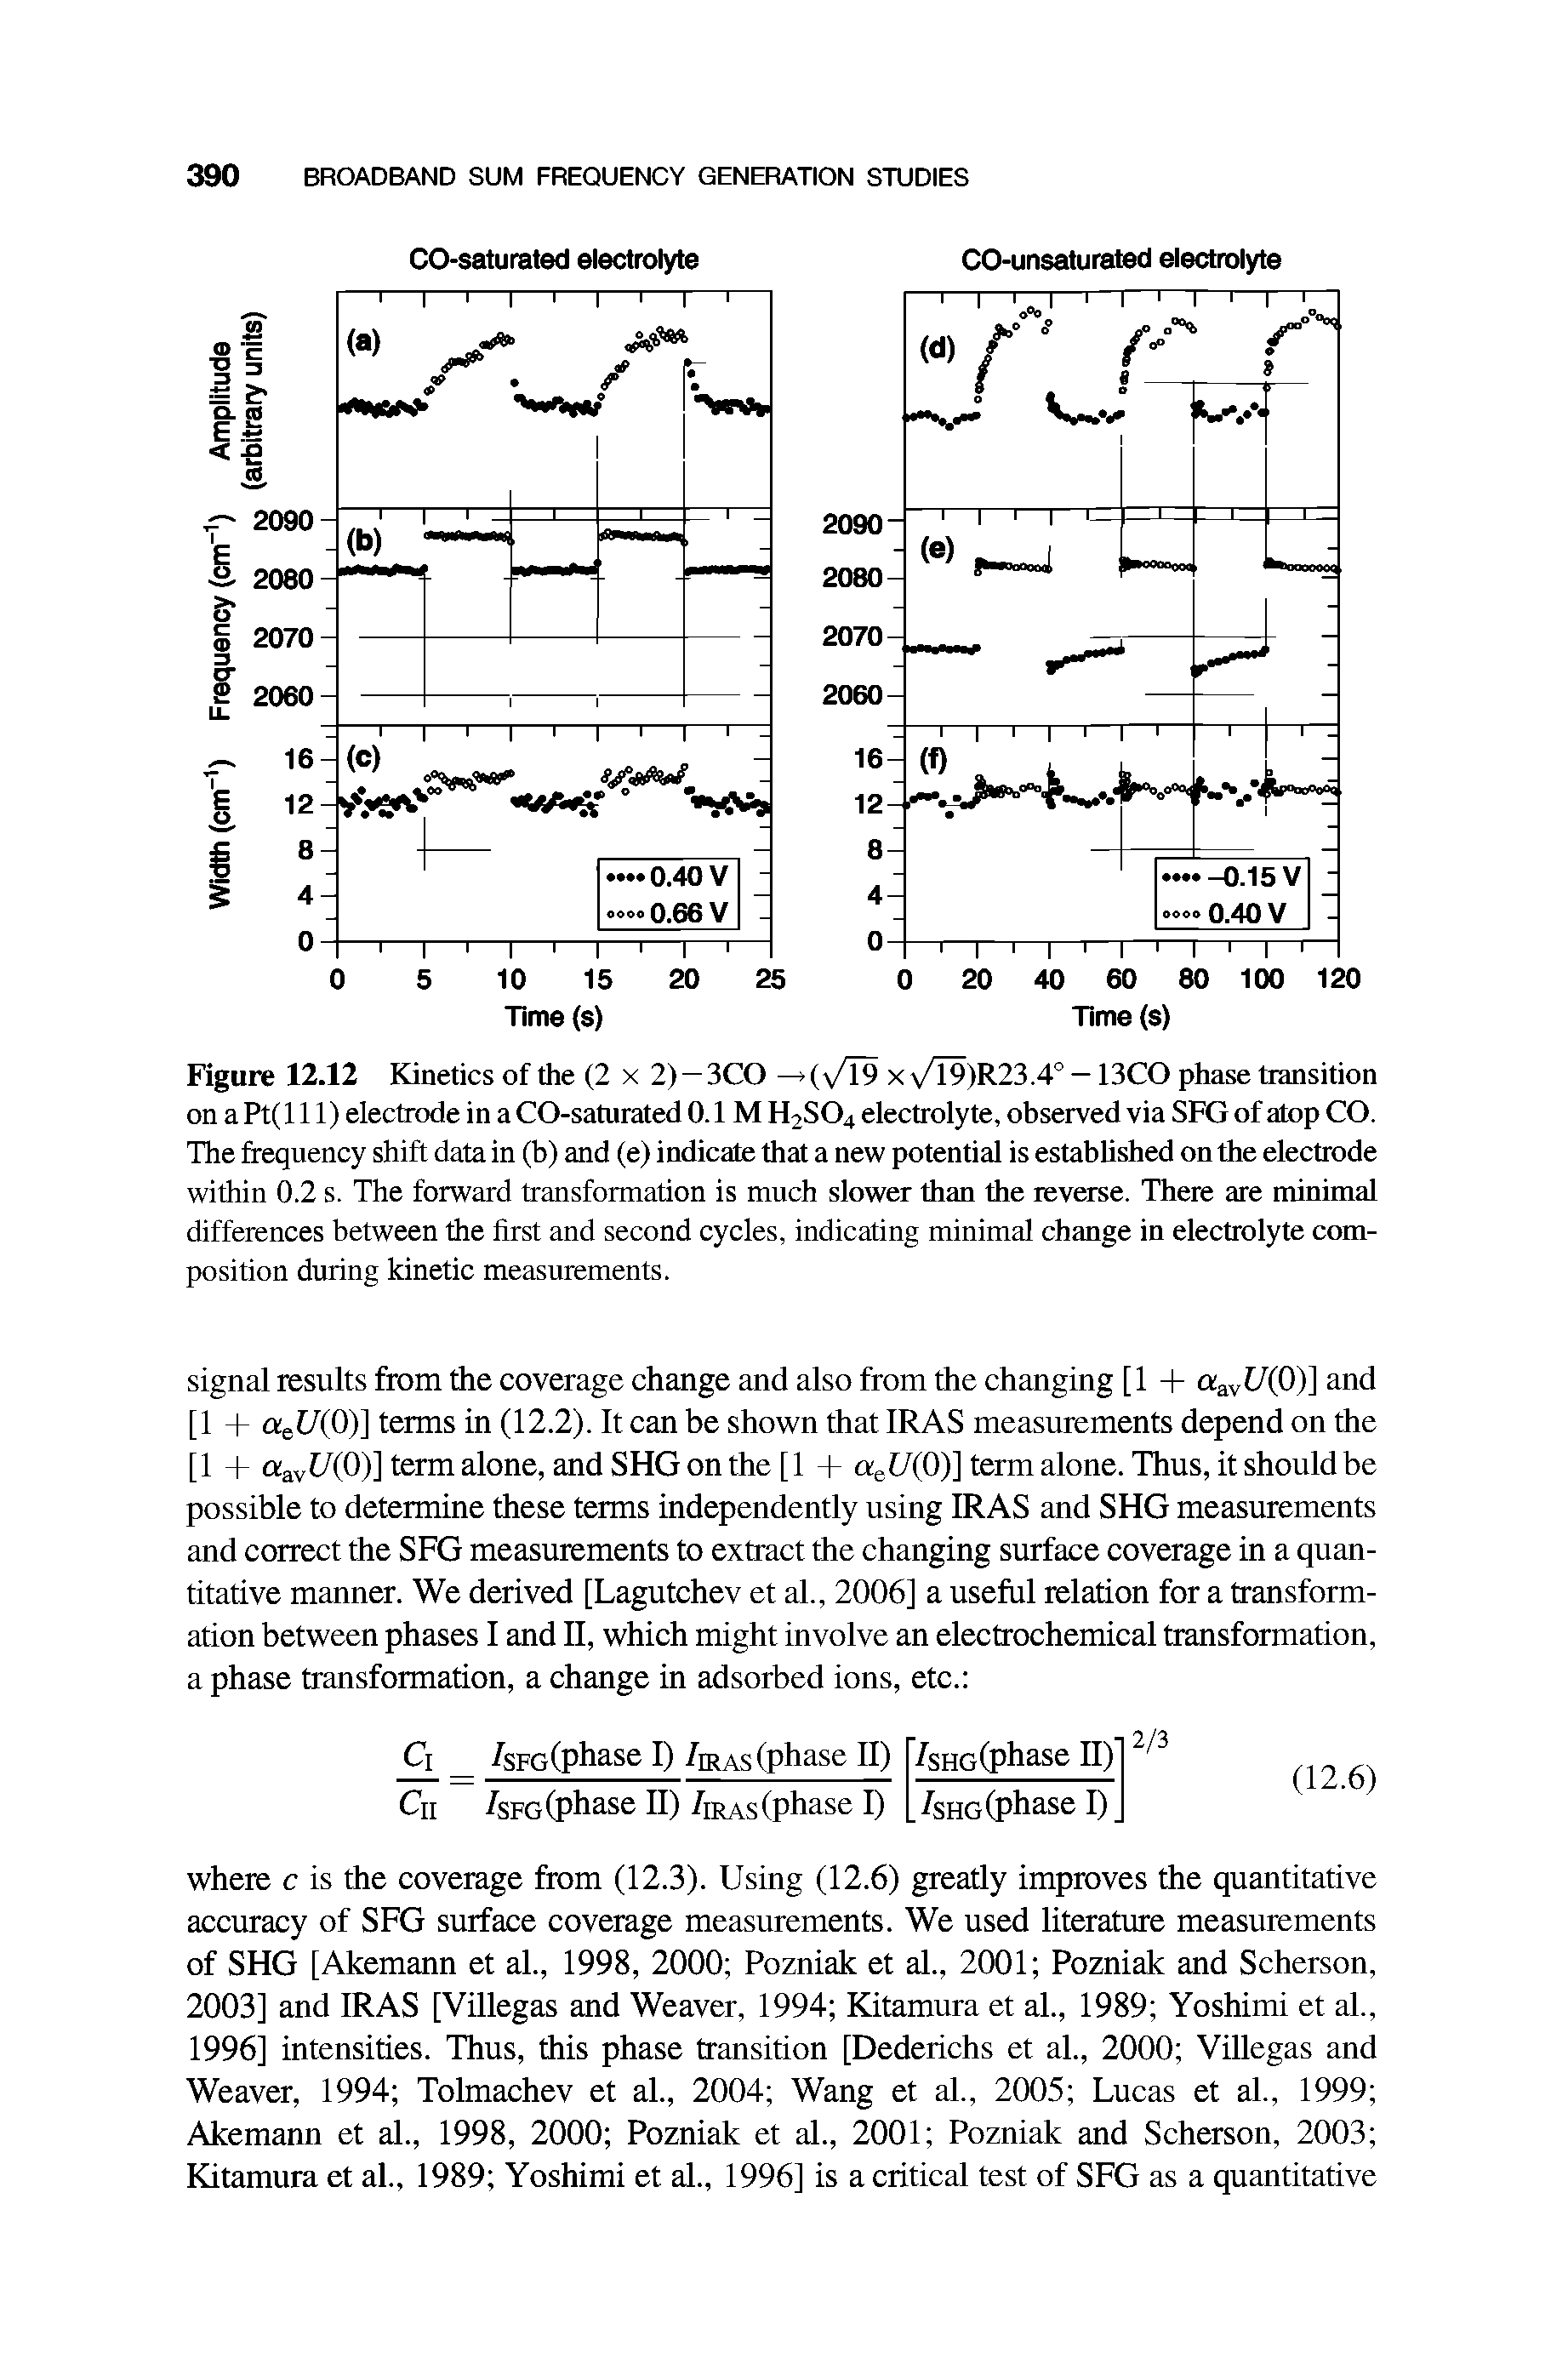 Figure 12.12 Kinetics of the (2 x 2) —3CO - ( /l9 xvT9)R23.4° — 13CO phase transition on a Pt( 111) electrode in a CO-saturated 0.1M H2SO4 electrolyte, observed via SFG of atop CO. The frequency shift data in (b) and (e) indicate that a new potential is estabhshed on the electrode within 0.2 s. The forward transformation is much slower than the reverse. There are minimal differences between the first and second cycles, indicating minimal change in electrolyte composition during kinetic measurements.